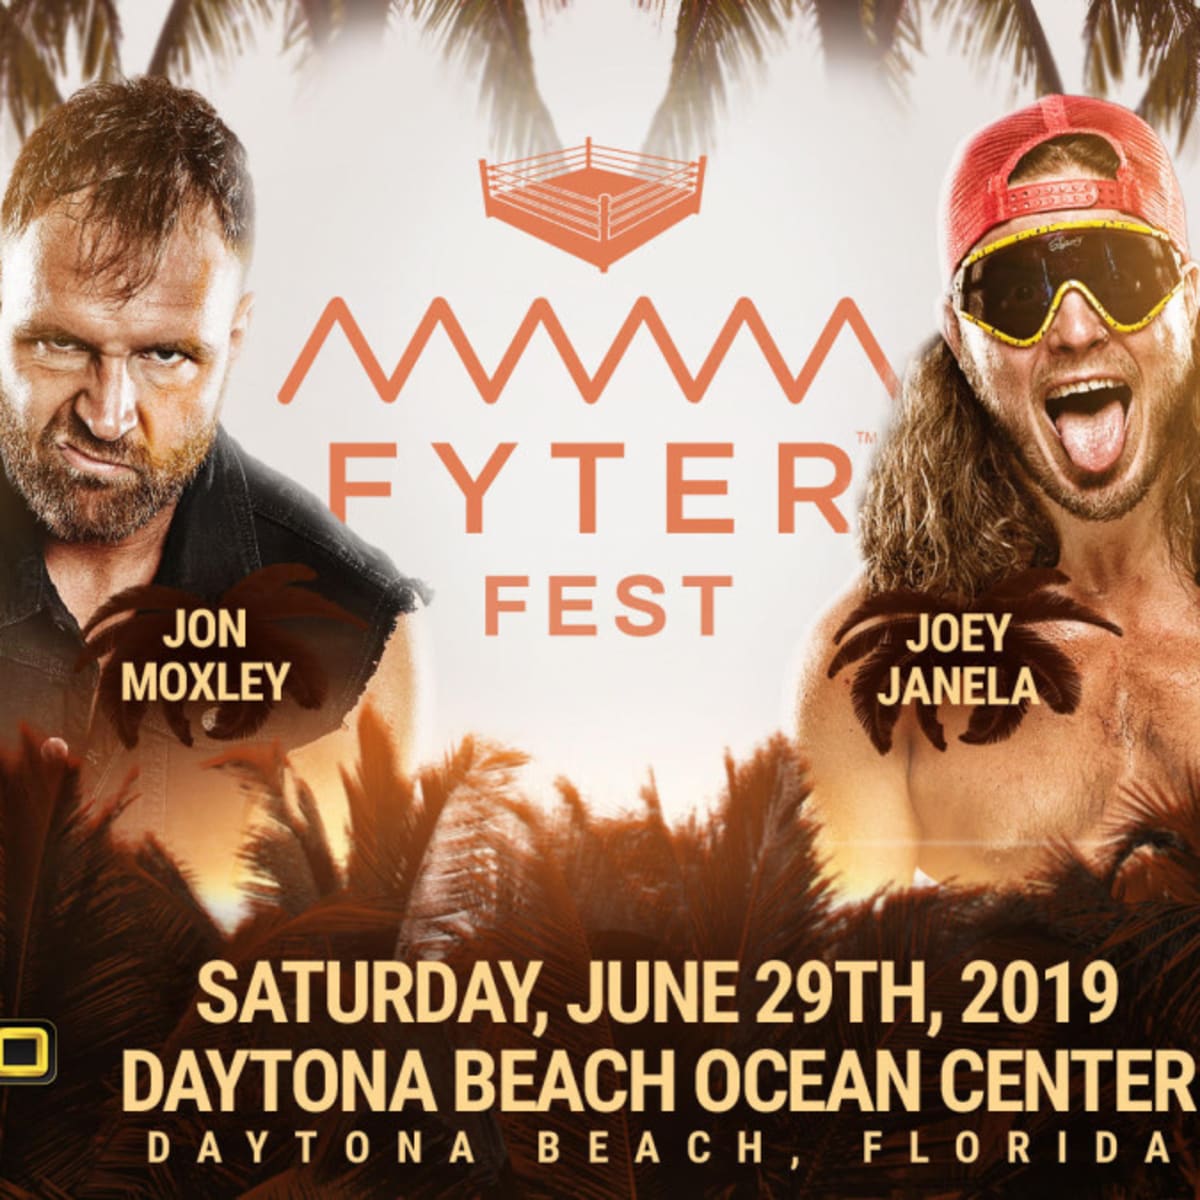 How to watch AEW Fyter Fest Streaming free on B/R Live app